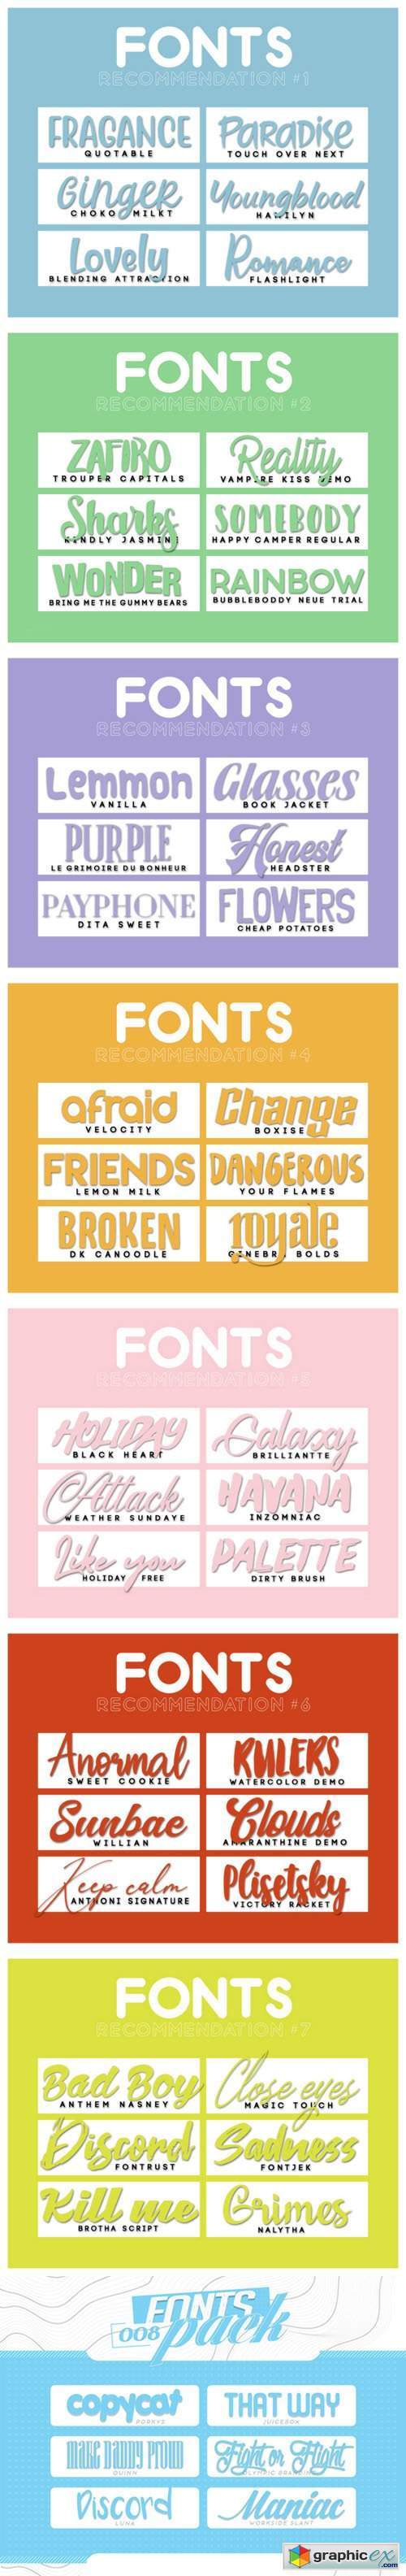 48 Awesome Fonts Collection